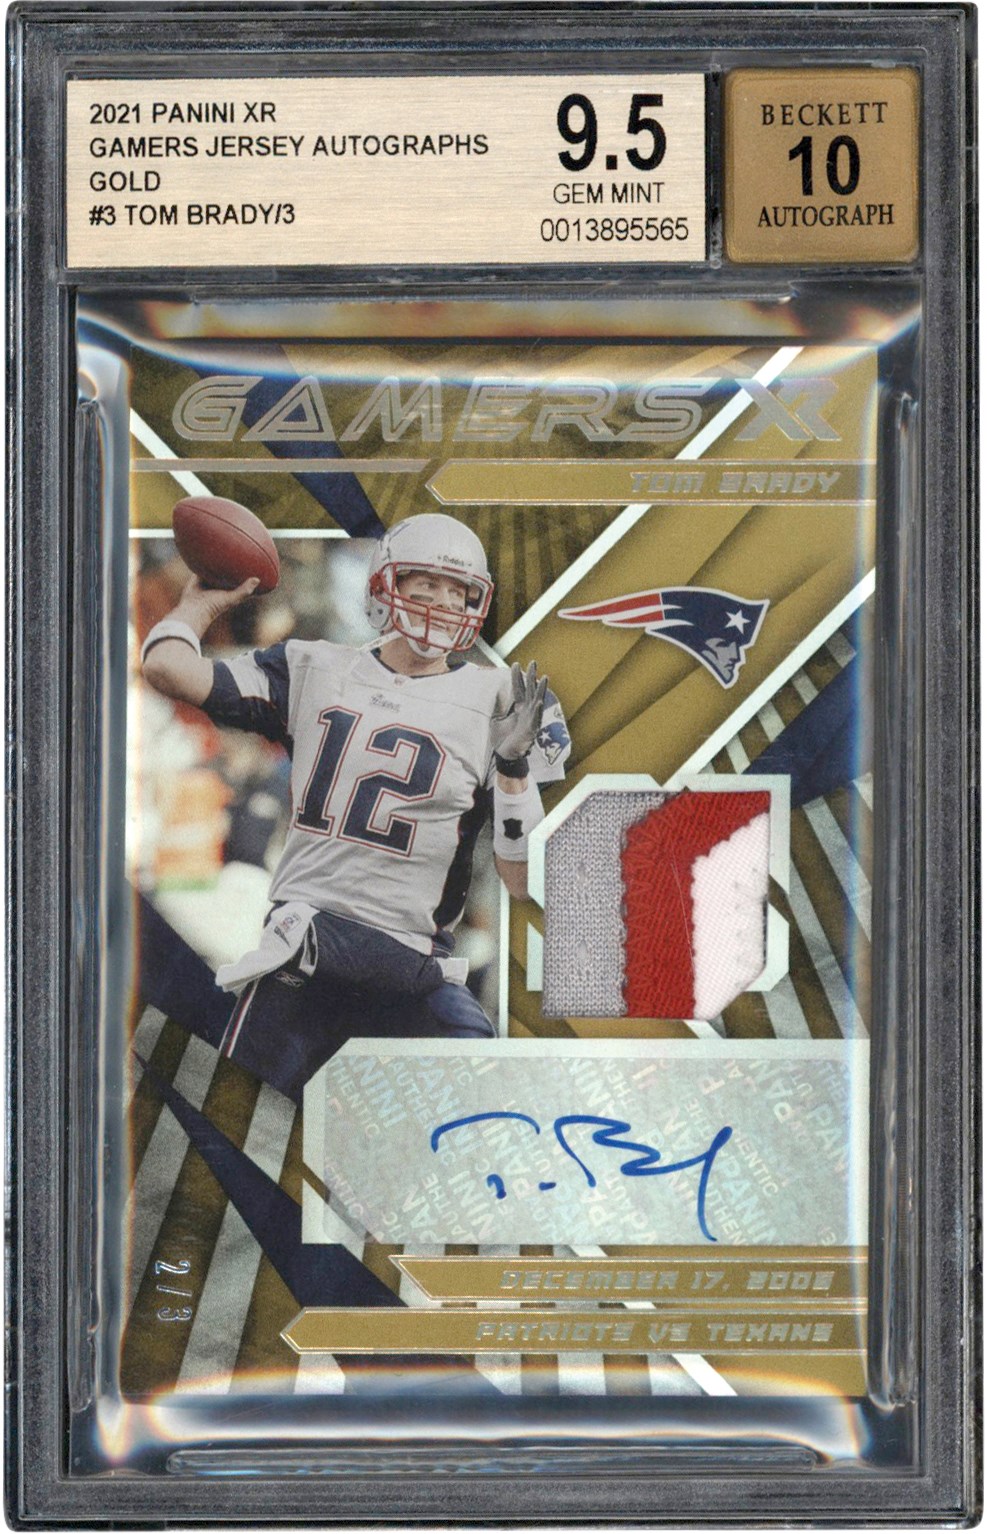 - 2021 Panini XR Football Gamers Jersey Autograph Gold #3 Tom Brady 12/17/06 Game Used Patch #2/3 BGS GEM MINT 9.5 Auto 10 (Pop 1 of 1 Highest Graded)